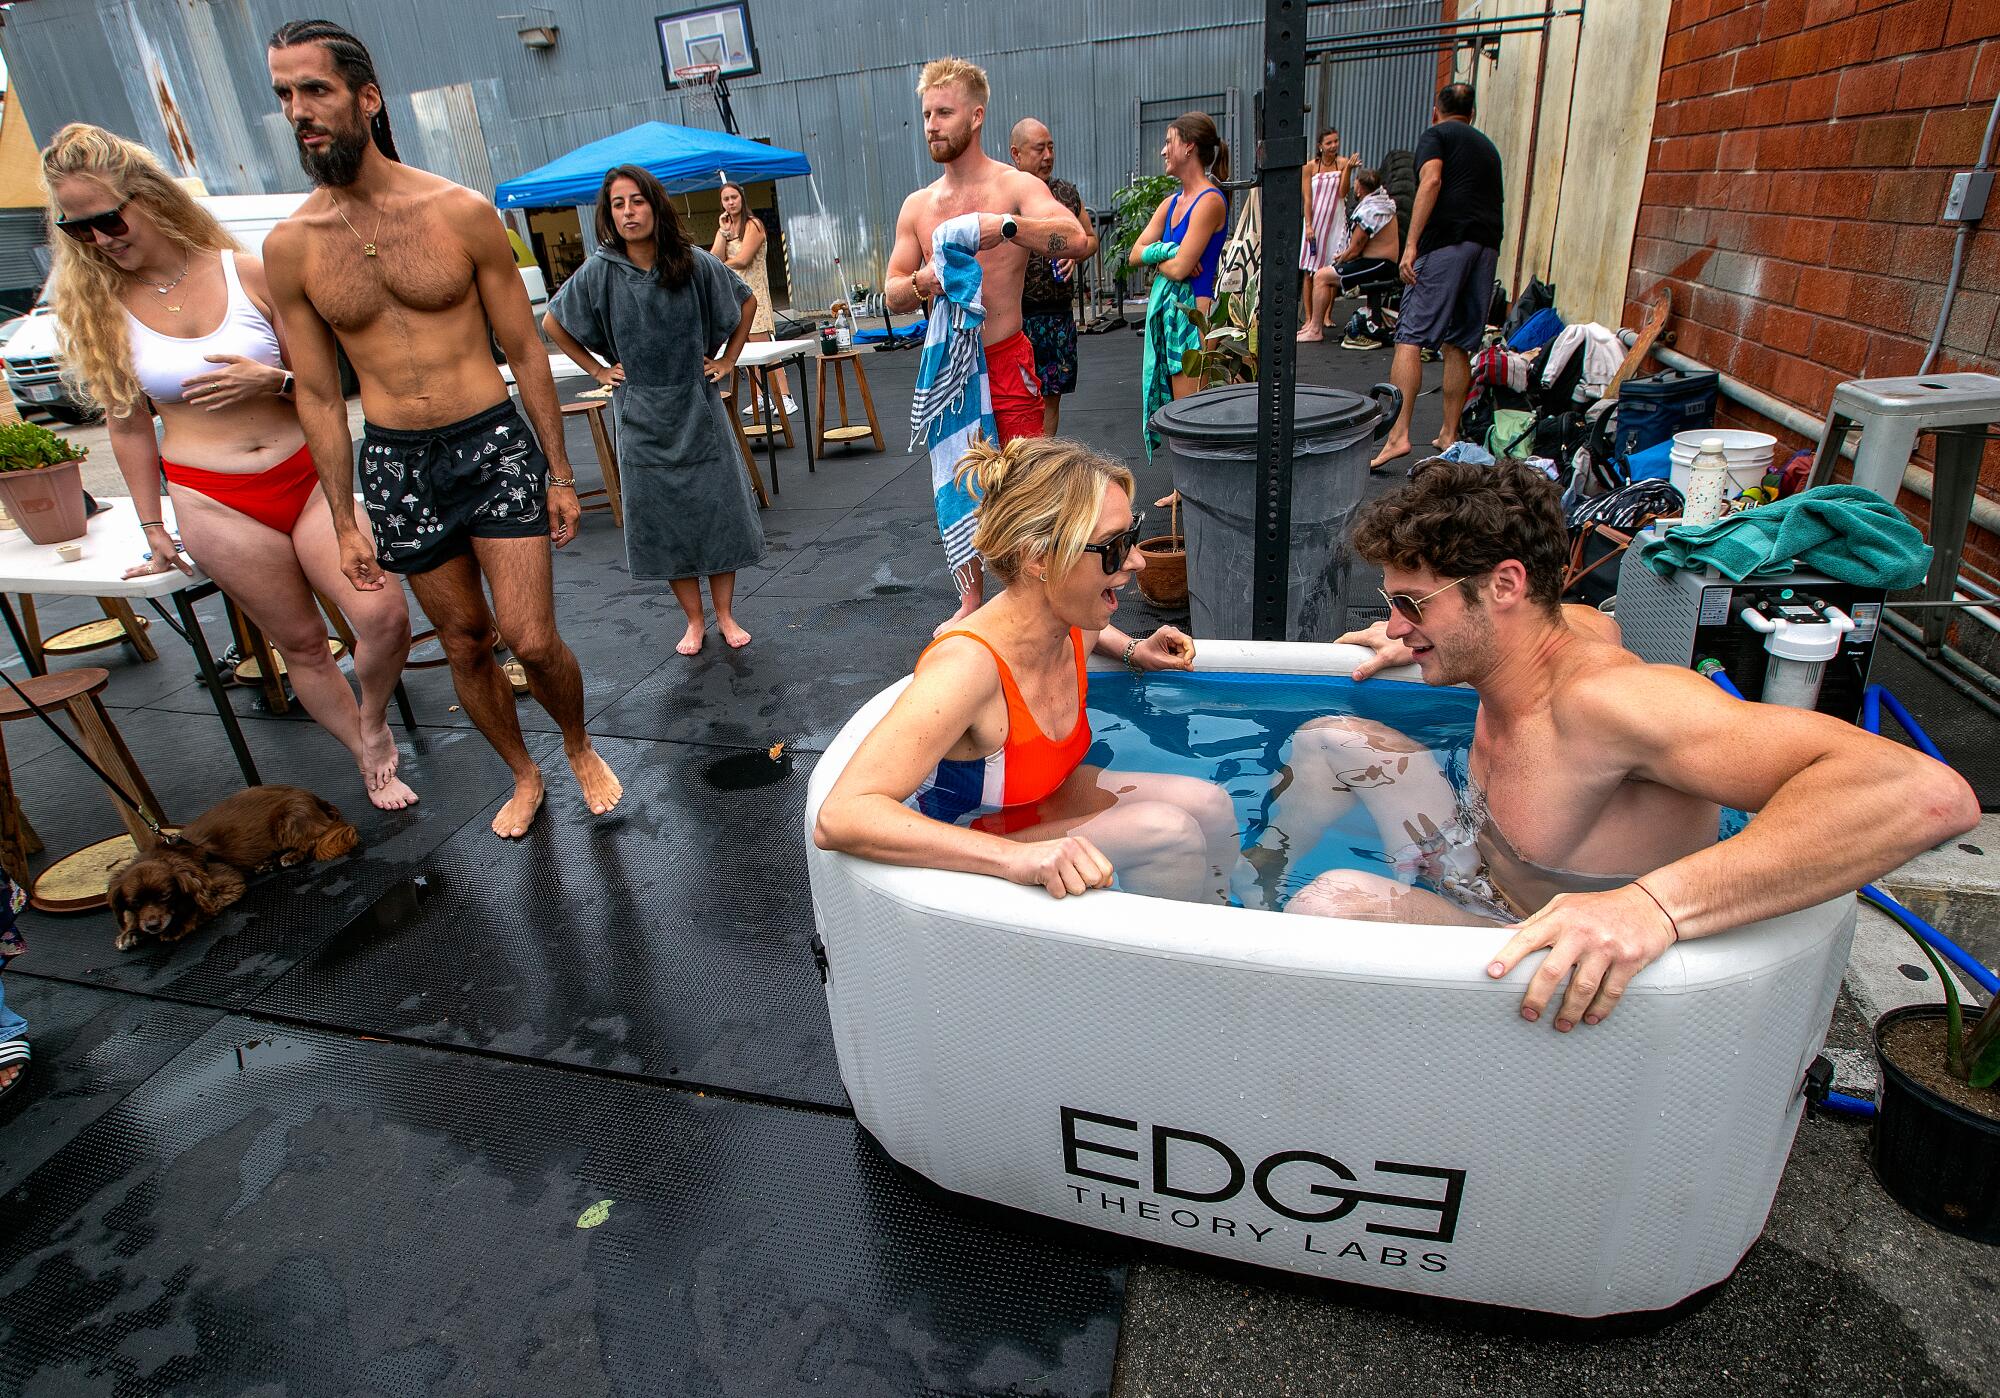 Two people sit in an outdoor ice bath while others in bathing suits stand nearby.